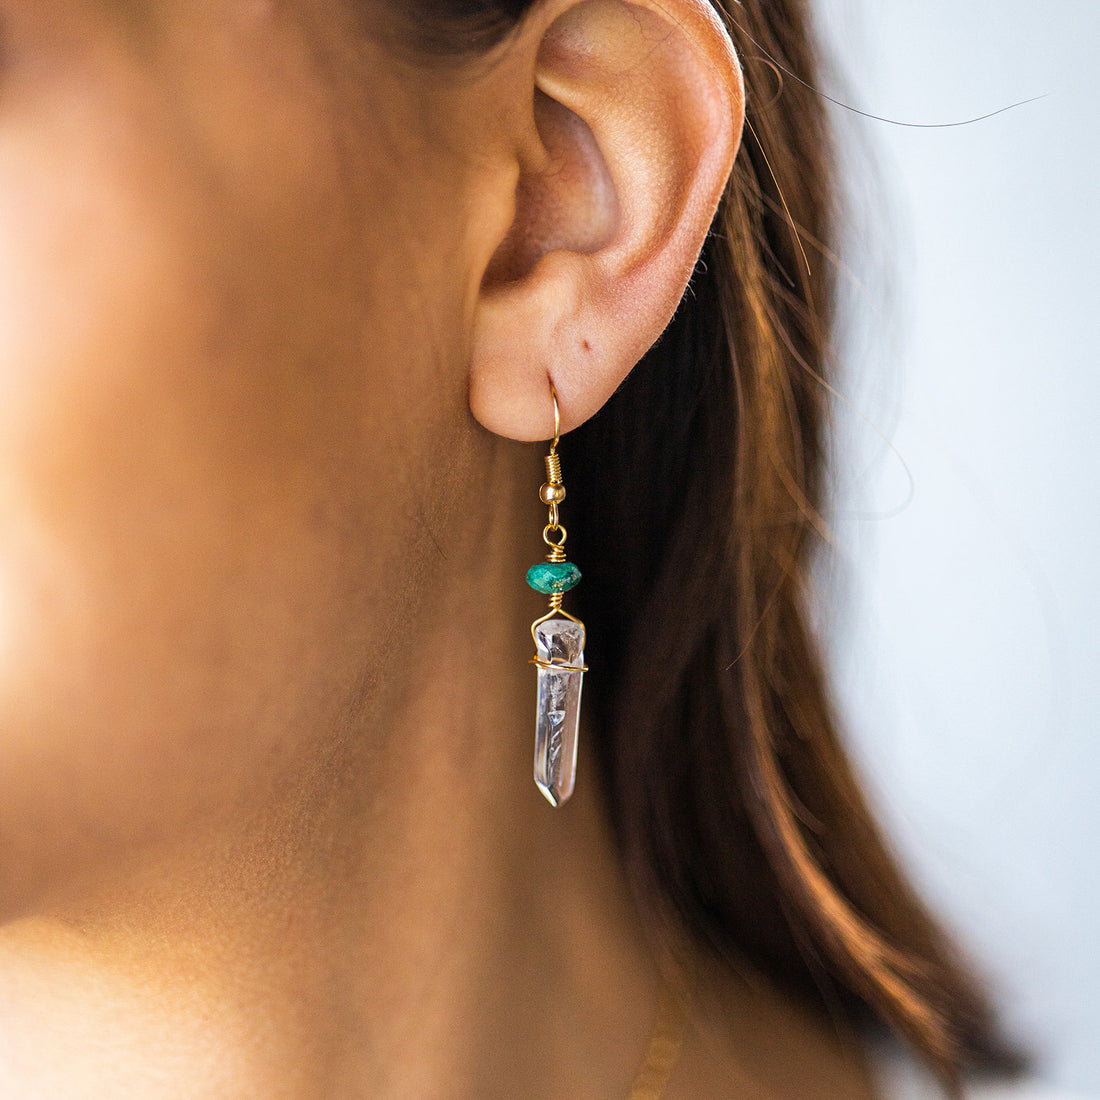 Wire Wrapped Crystal Earrings - Clear Quartz and Chrysocolla